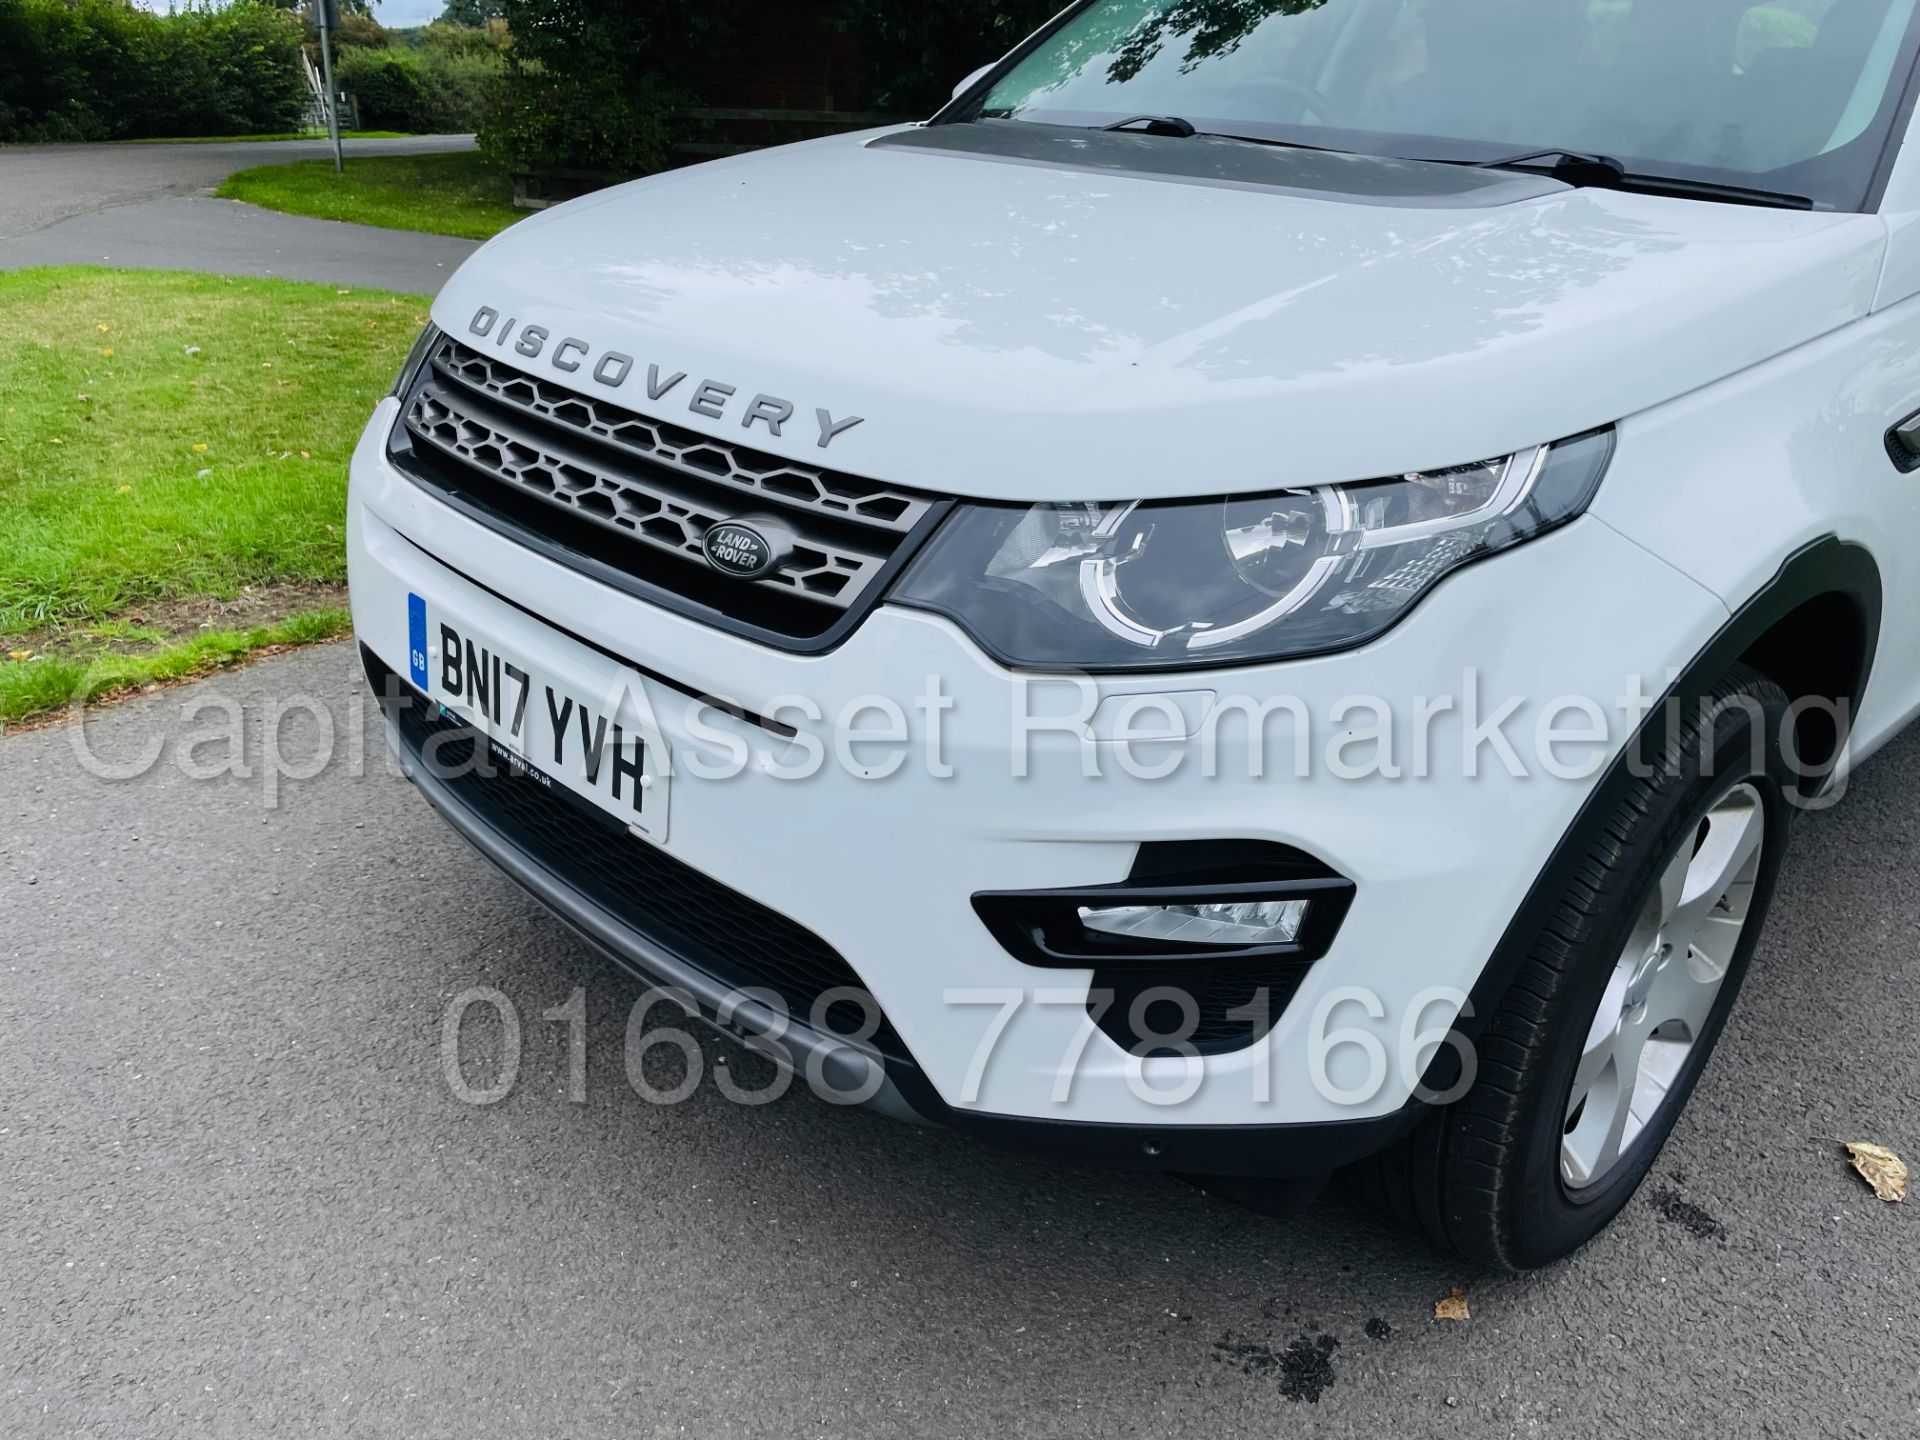 (On Sale) LAND ROVER DISCOVERY SPORT *SE TECH* SUV (2017 -EURO 6) '2.0 TD4 - STOP/START' (1 OWNER) - Image 16 of 52